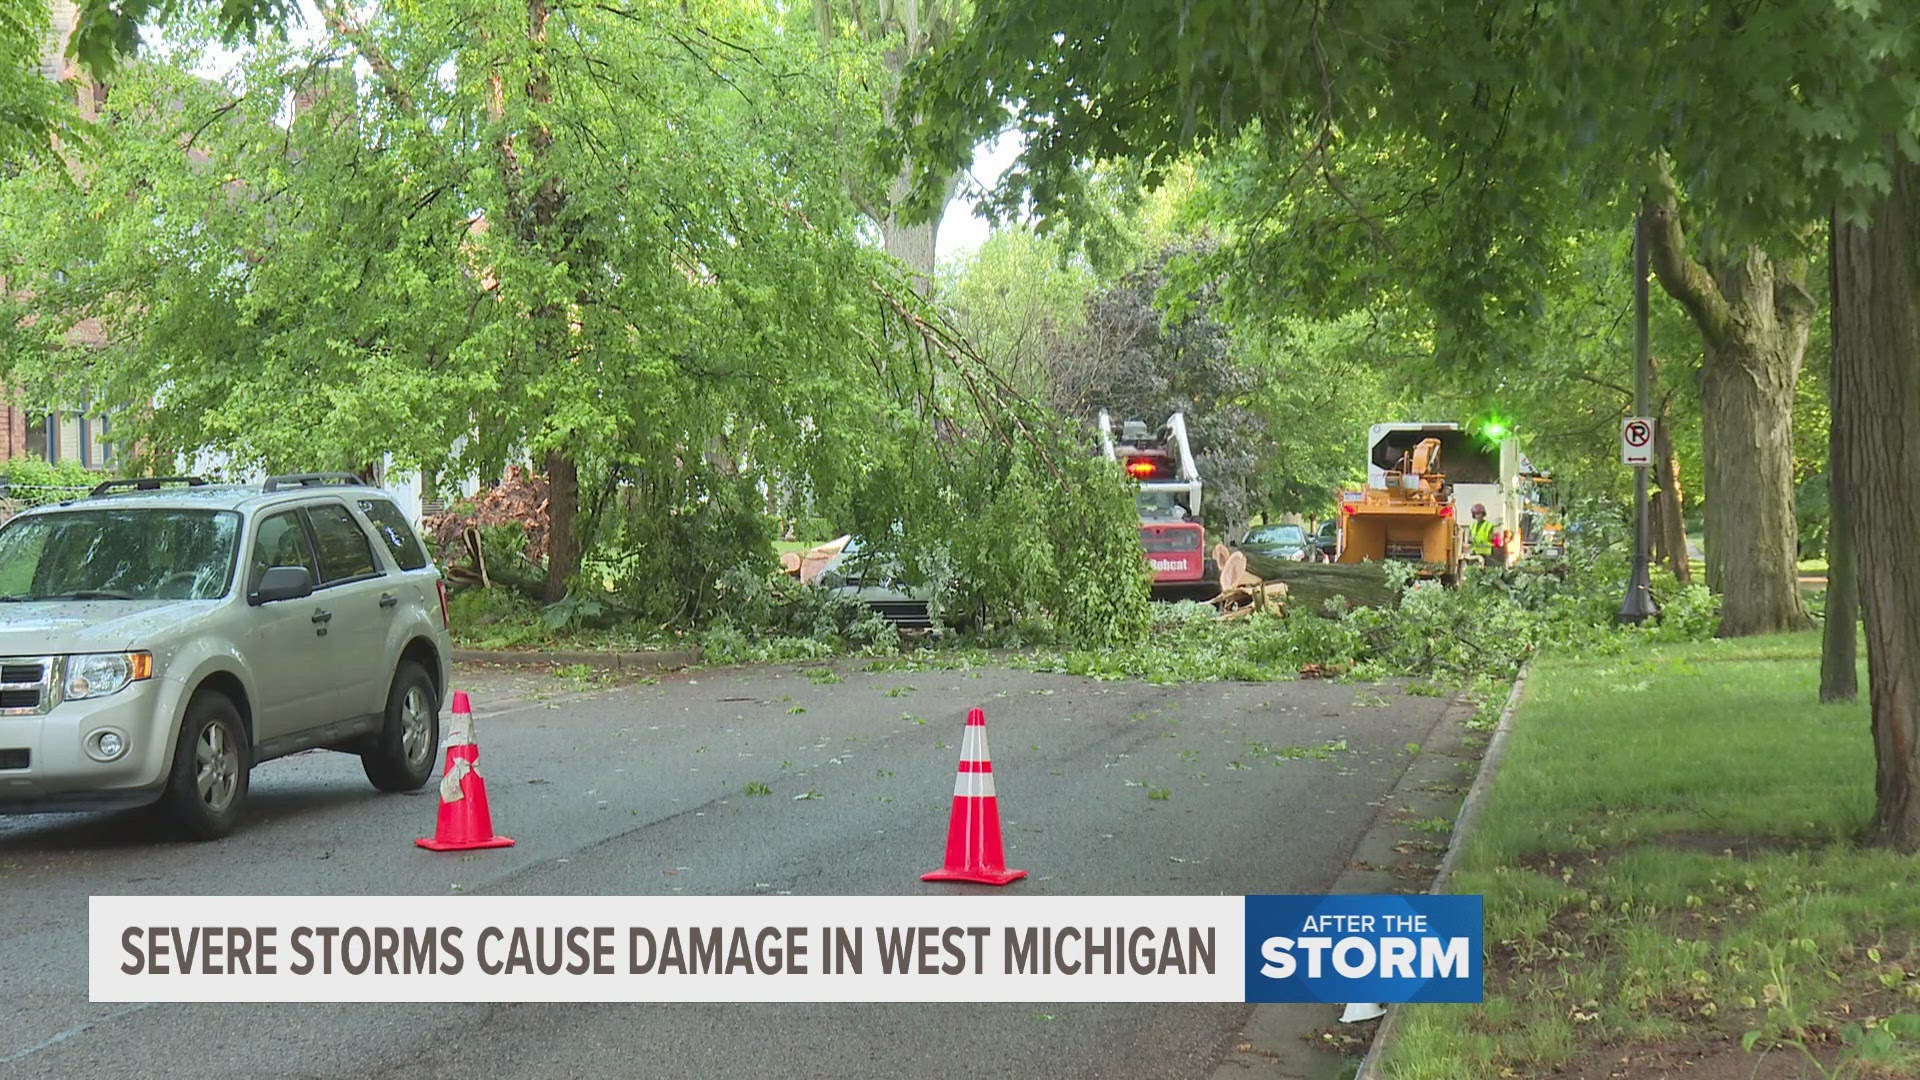 The storms primarily impacted those in southeast Kent County. Trees were uprooted, homes were damaged and power was knocked out in some areas.